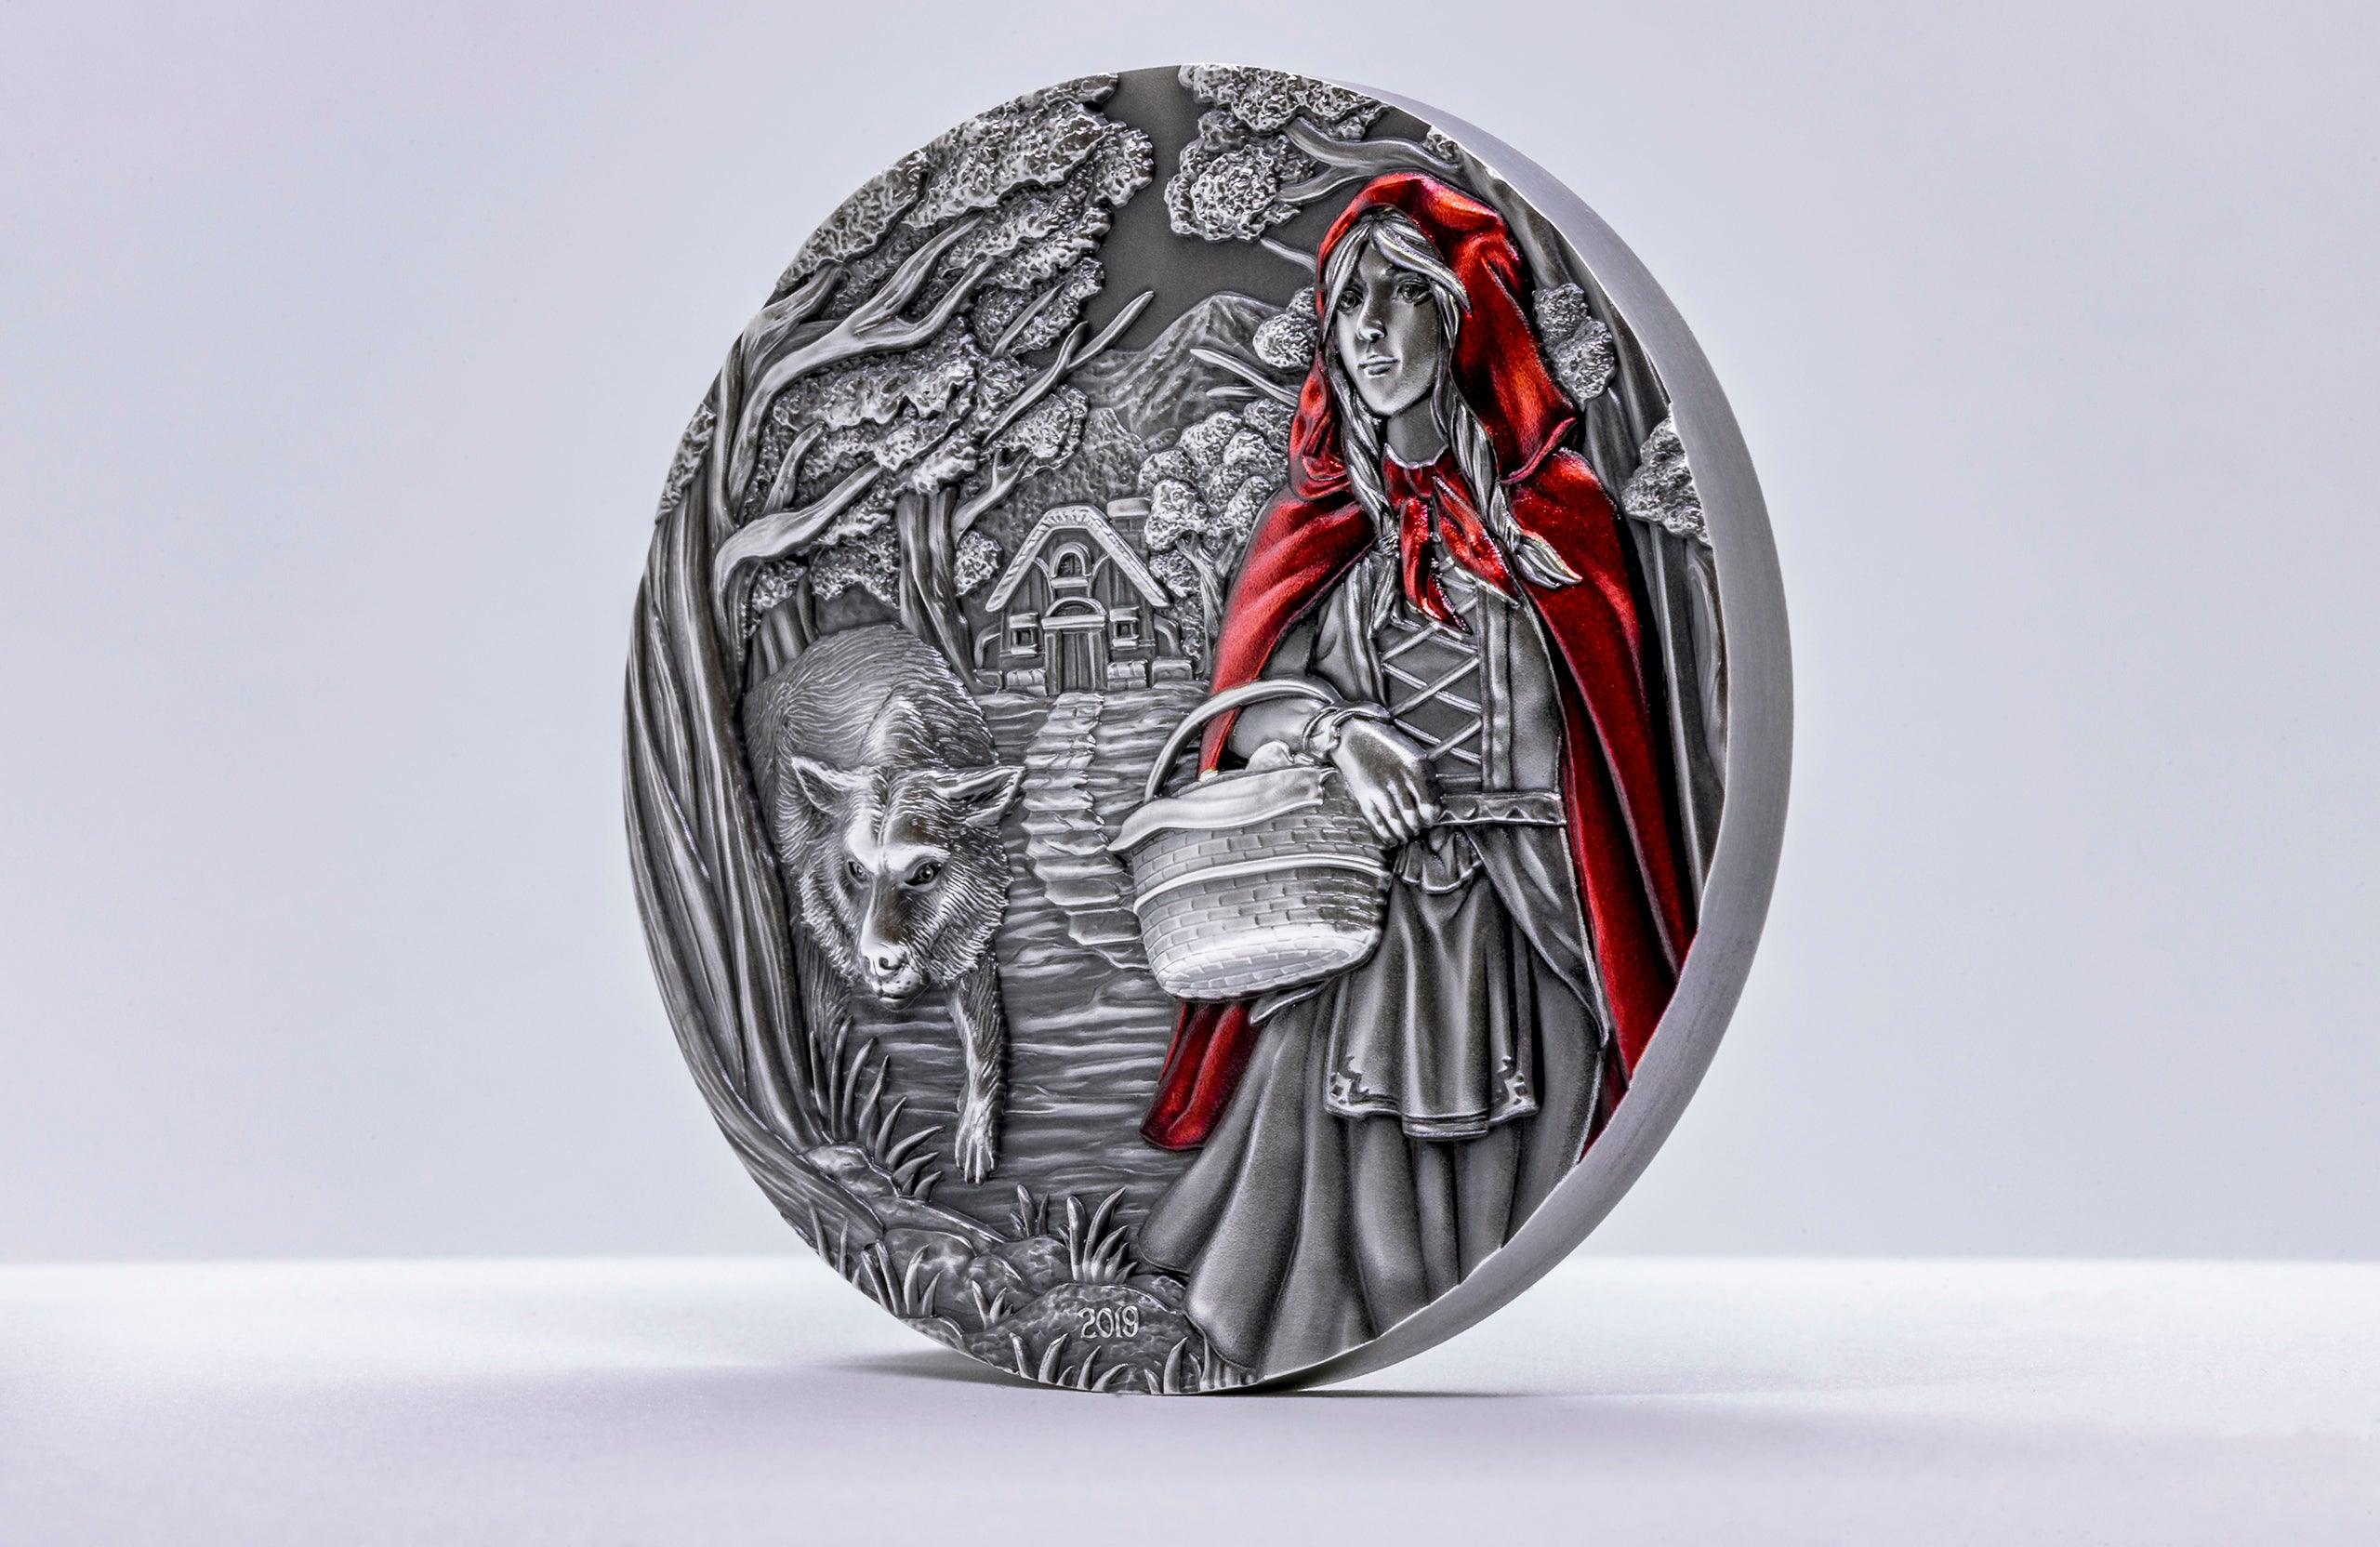 LITTLE RED RIDING HOOD Fairy Tales Fables 3 Oz Silver Coin 20$ Cook Islands 2019 - PARTHAVA COIN